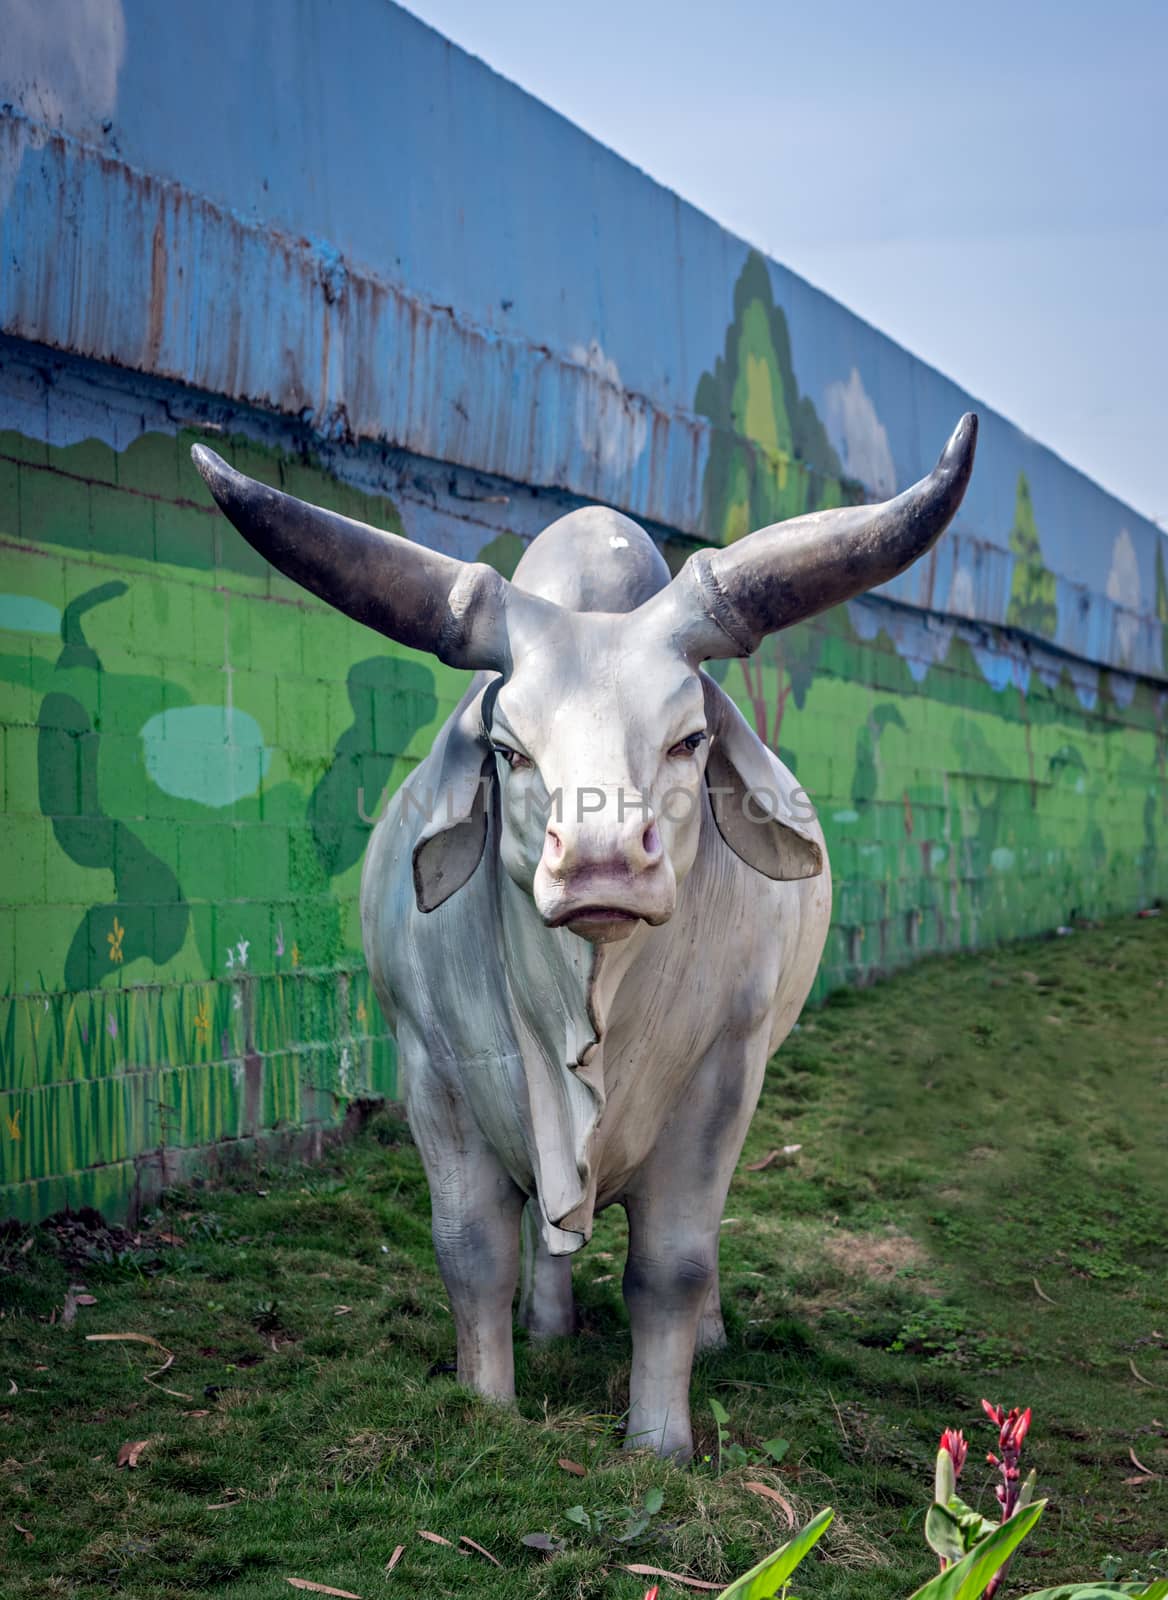 Life size, realistic sculpture of a charging bull in Warje. by lalam